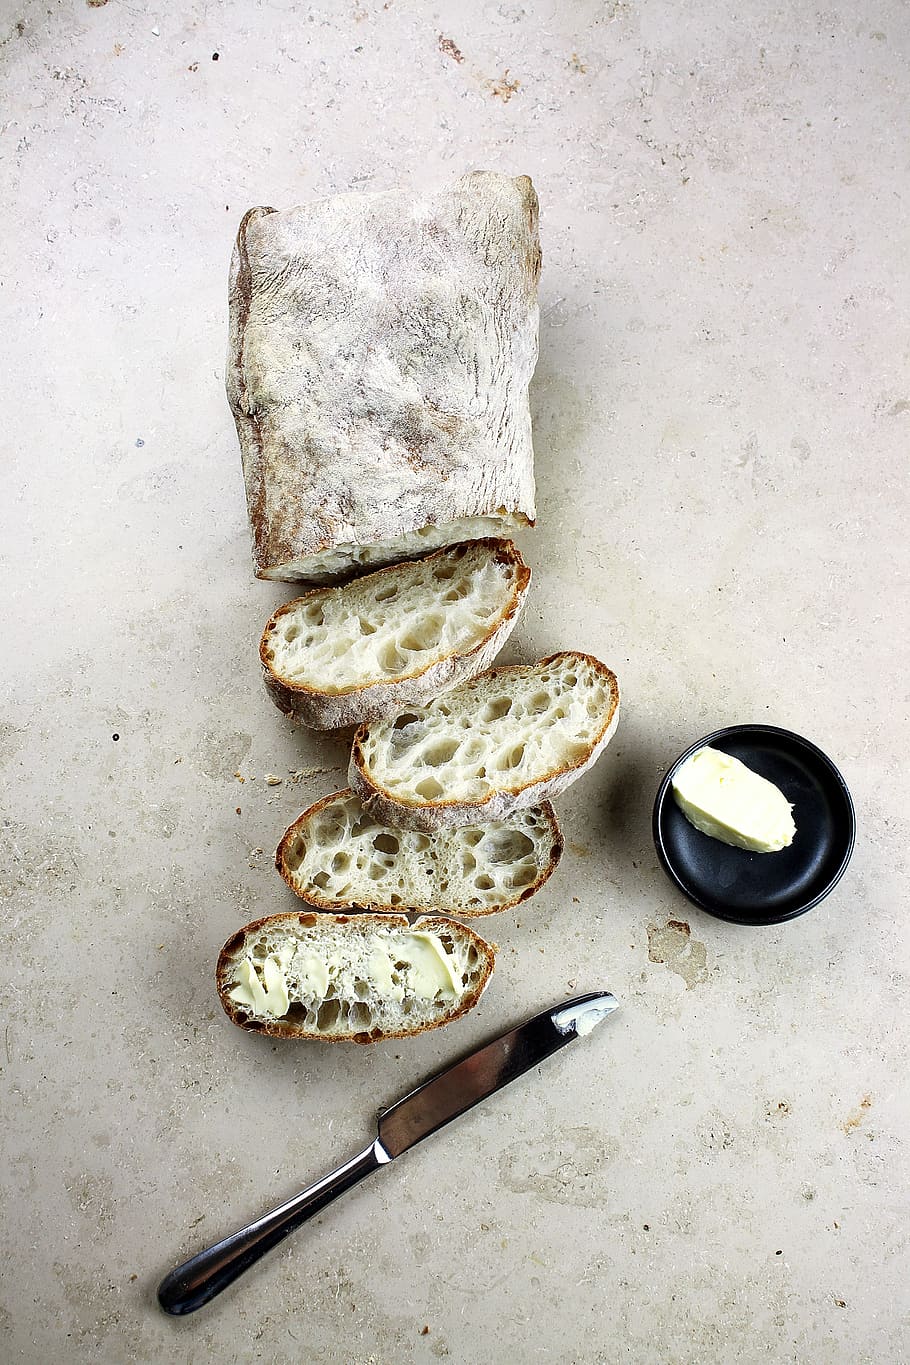 Bread and butter, bake, baked, bread, breakfast, butter, knife, rustique, sour, sour dough